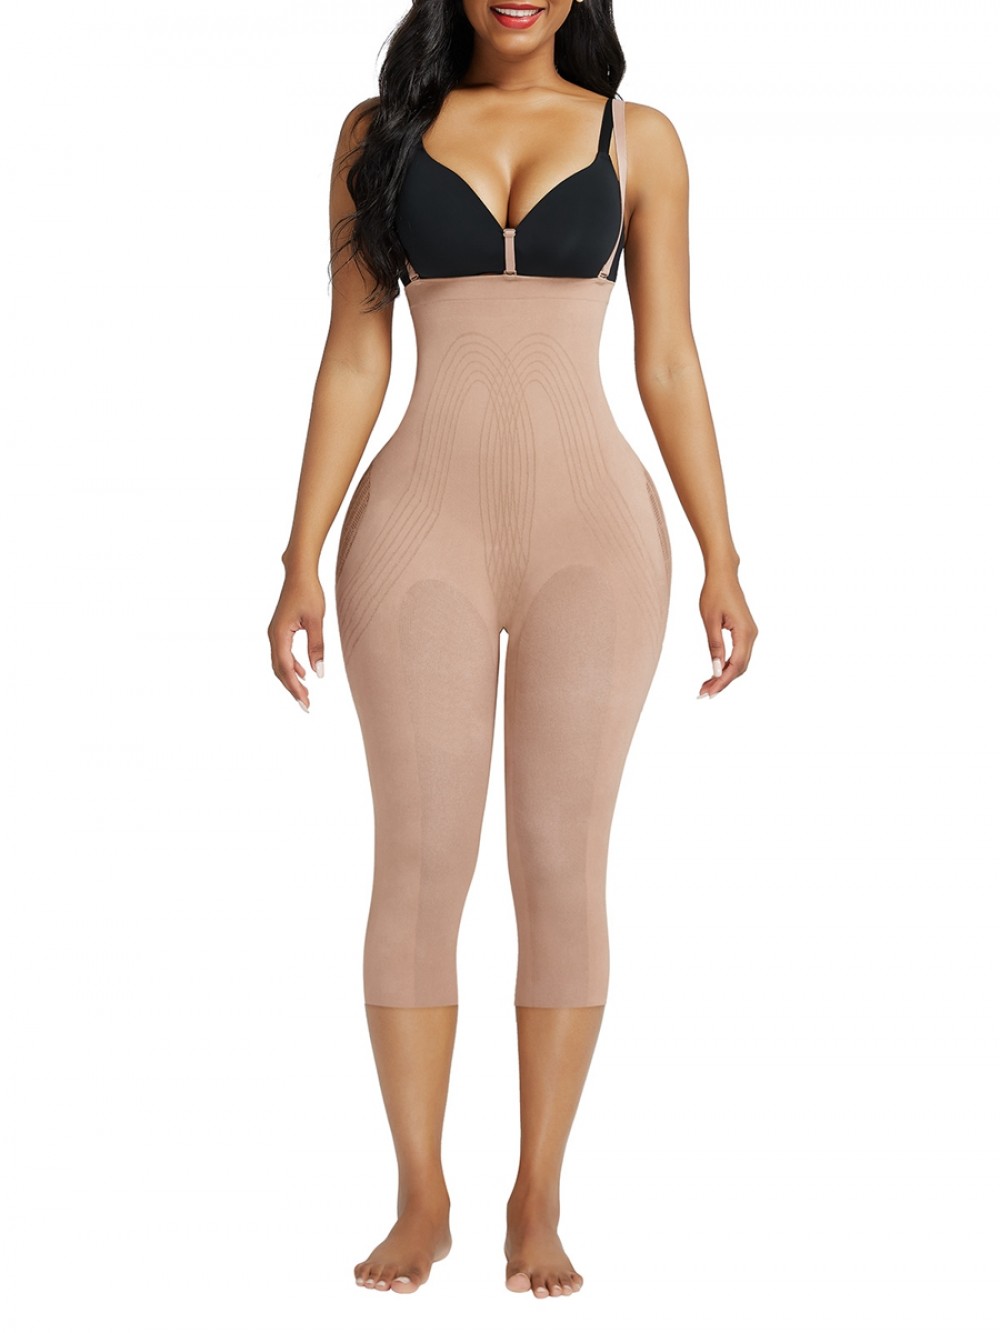 Nude Seamless Adjustable Straps Full Body Shaper Firm Control